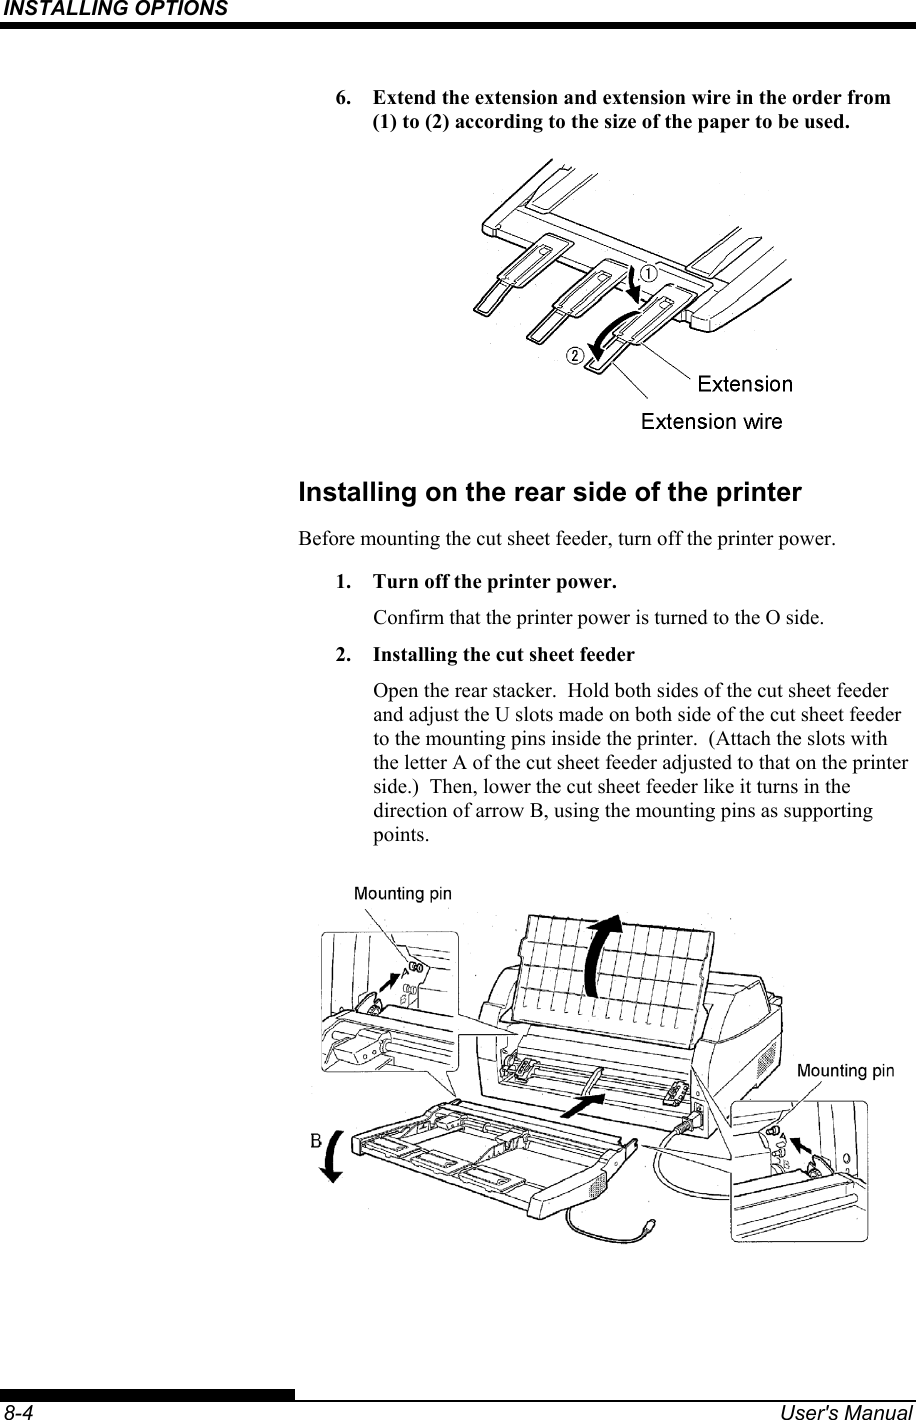 INSTALLING OPTIONS    8-4  User&apos;s Manual 6.  Extend the extension and extension wire in the order from (1) to (2) according to the size of the paper to be used.  Installing on the rear side of the printer Before mounting the cut sheet feeder, turn off the printer power. 1.  Turn off the printer power. Confirm that the printer power is turned to the O side. 2.  Installing the cut sheet feeder Open the rear stacker.  Hold both sides of the cut sheet feeder and adjust the U slots made on both side of the cut sheet feeder to the mounting pins inside the printer.  (Attach the slots with the letter A of the cut sheet feeder adjusted to that on the printer side.)  Then, lower the cut sheet feeder like it turns in the direction of arrow B, using the mounting pins as supporting points.  